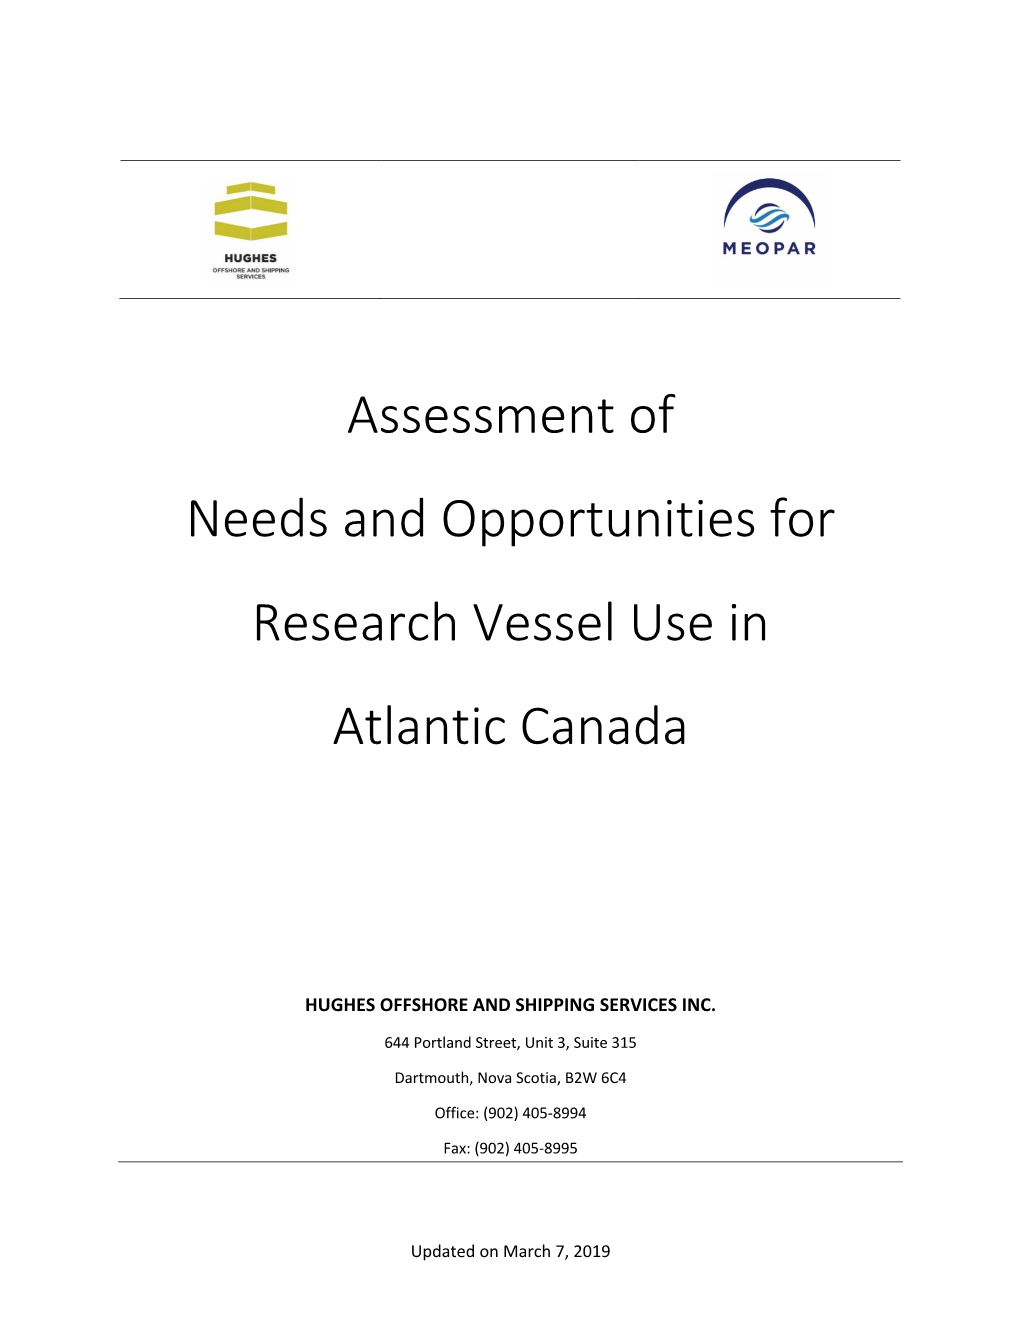 Assessment of Needs and Opportunities for Research Vessel Use in Atlantic Canada